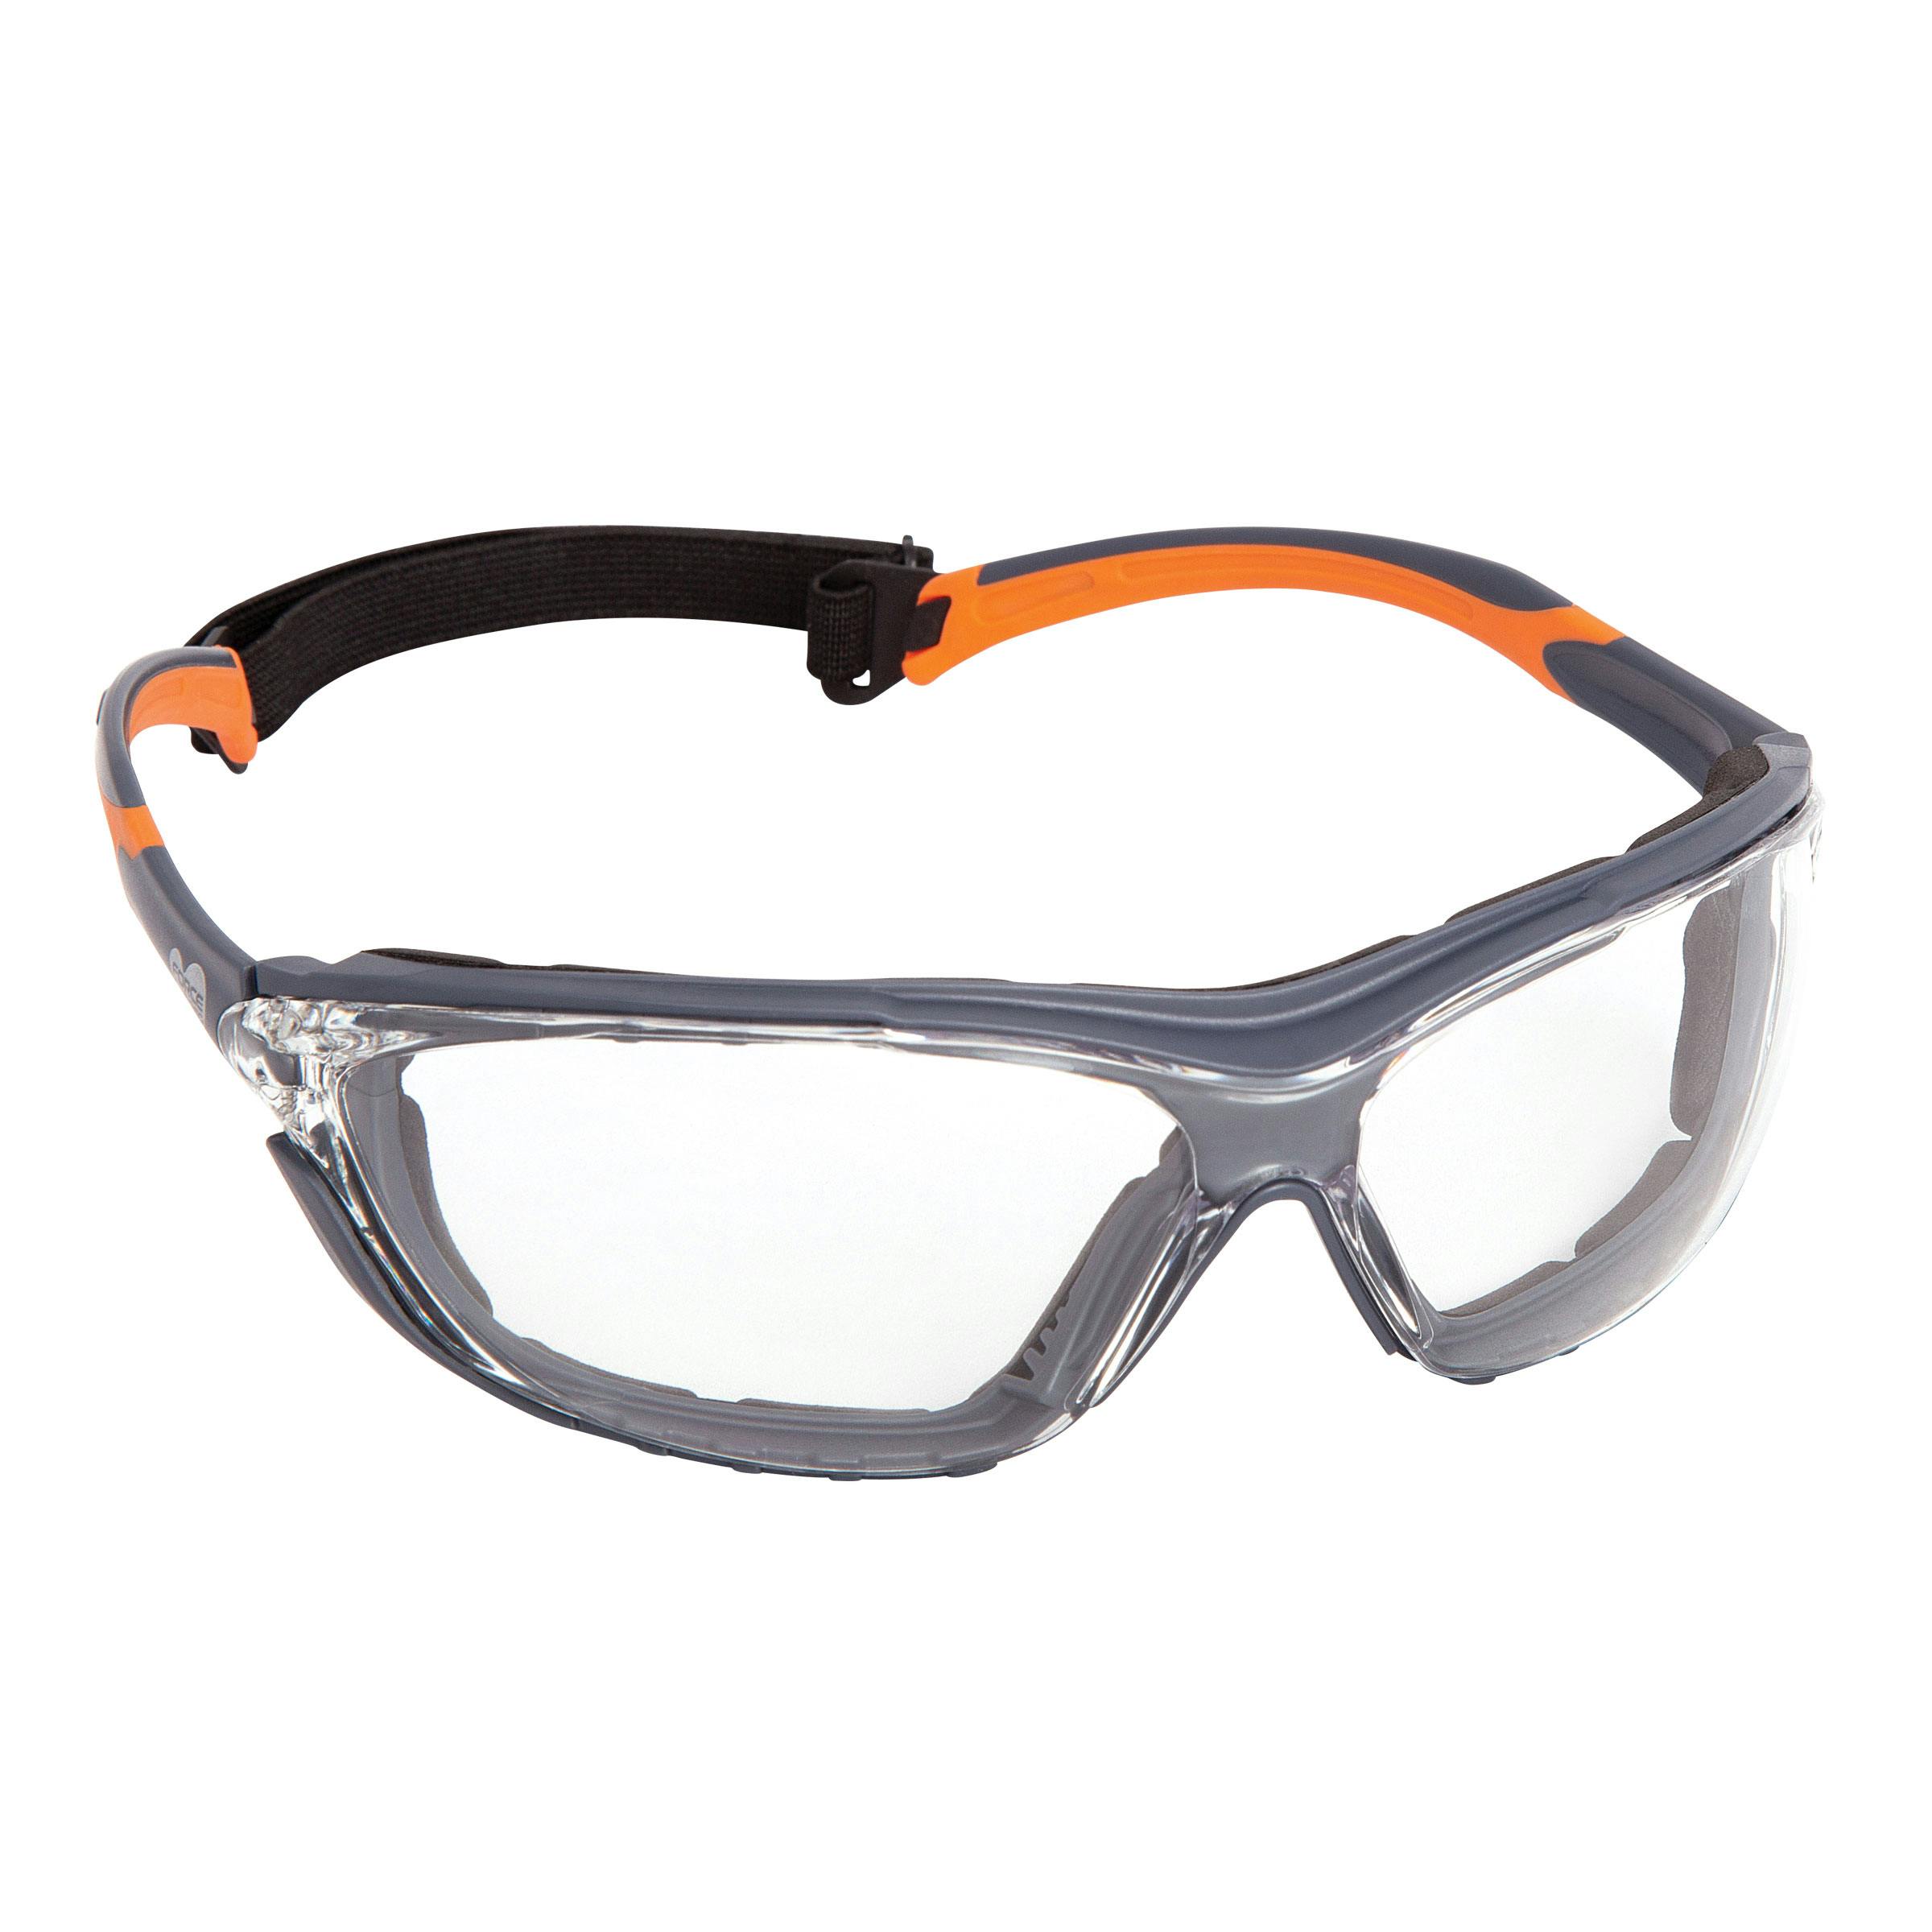 Force360 Neoguard Safety Spectacle With Foam Gasket